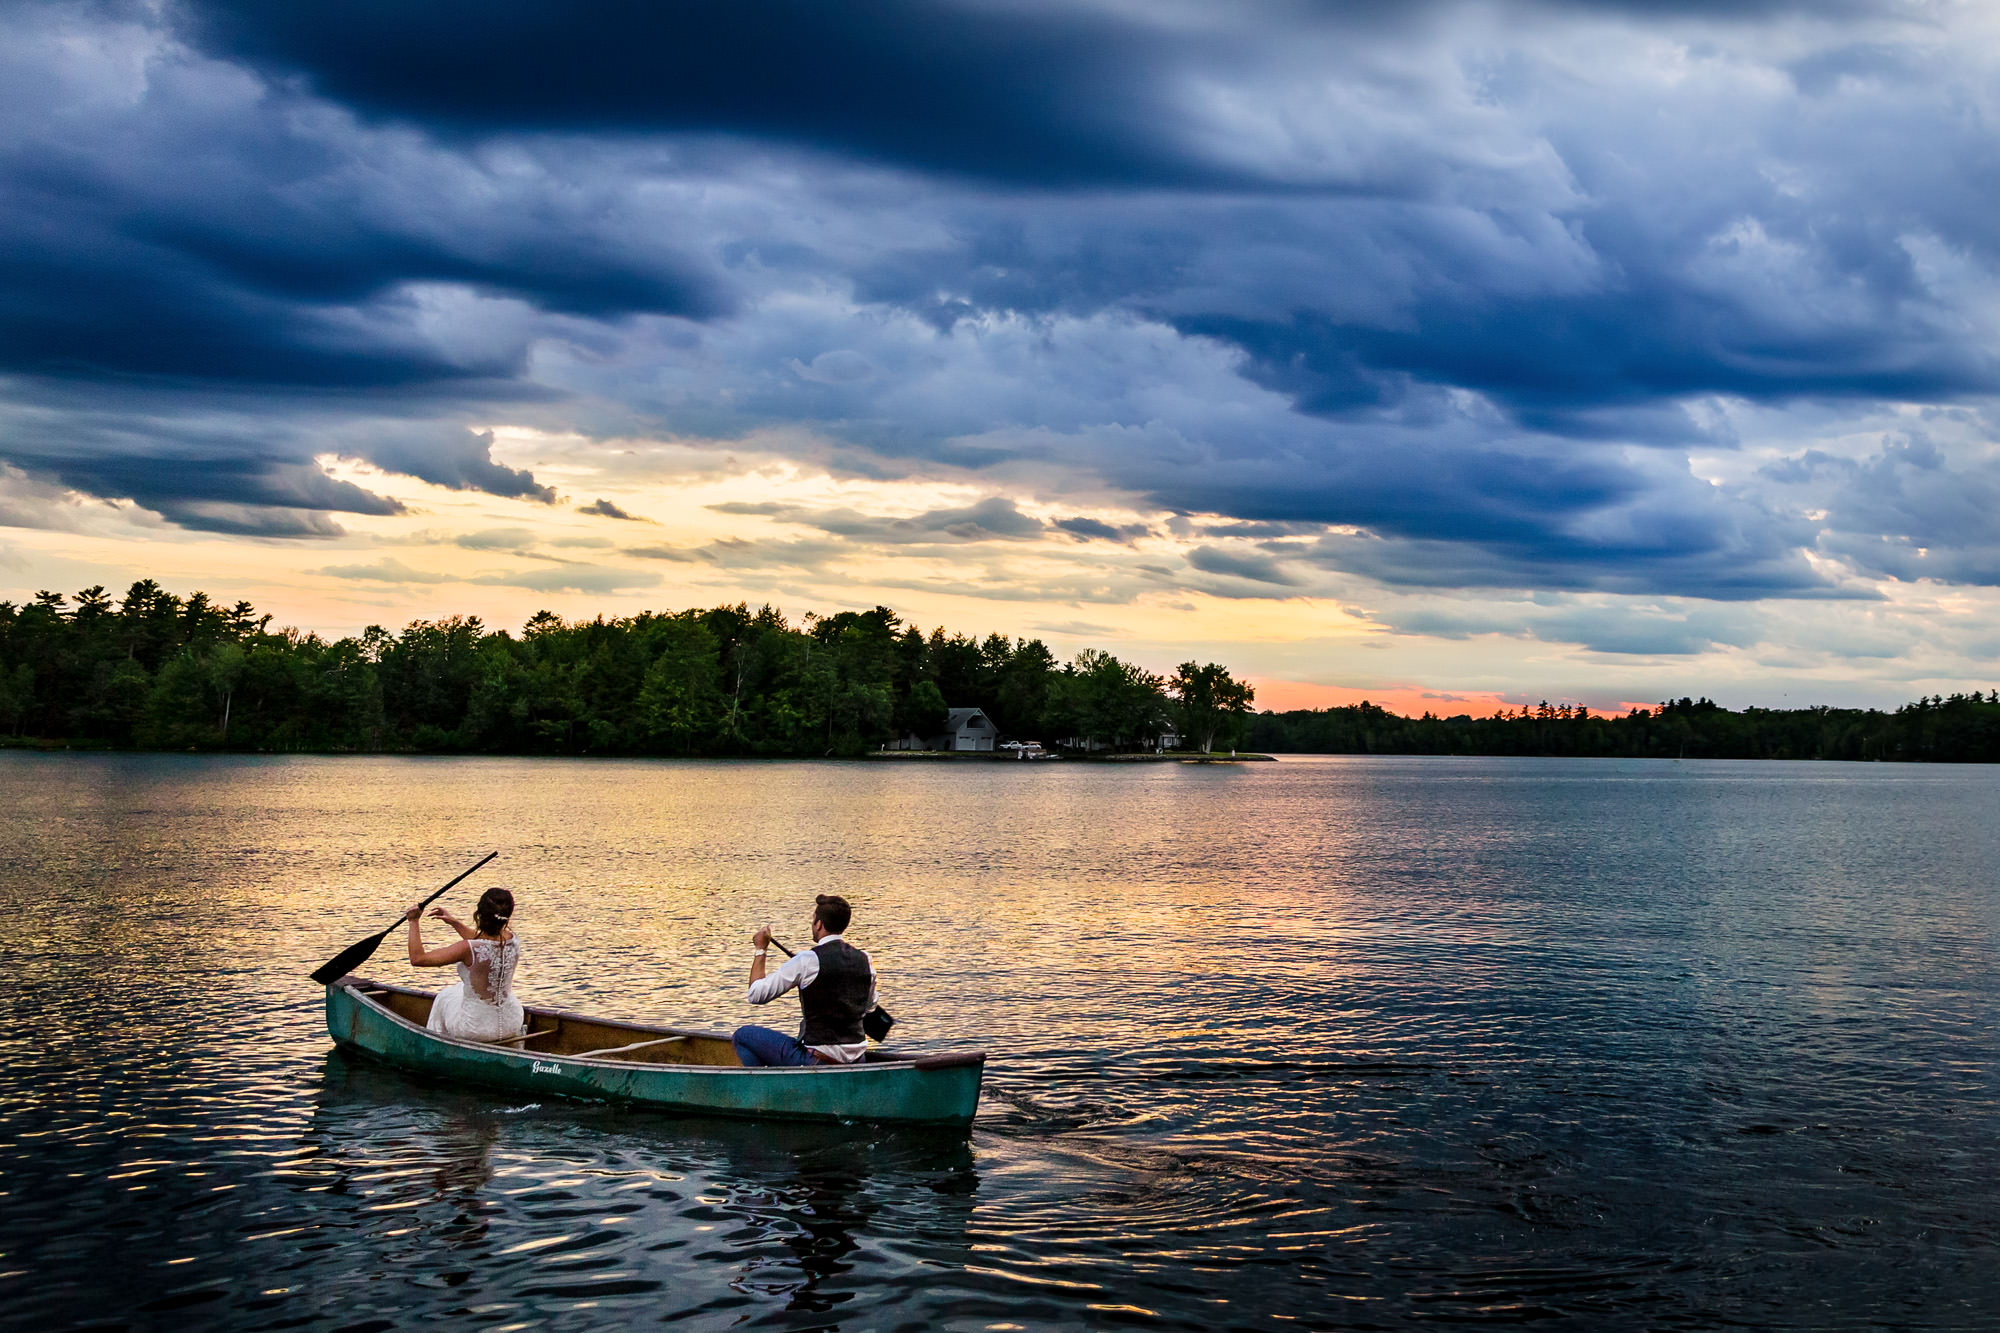 A bride and groom canoe at sunset on Cobbosseecontee lake